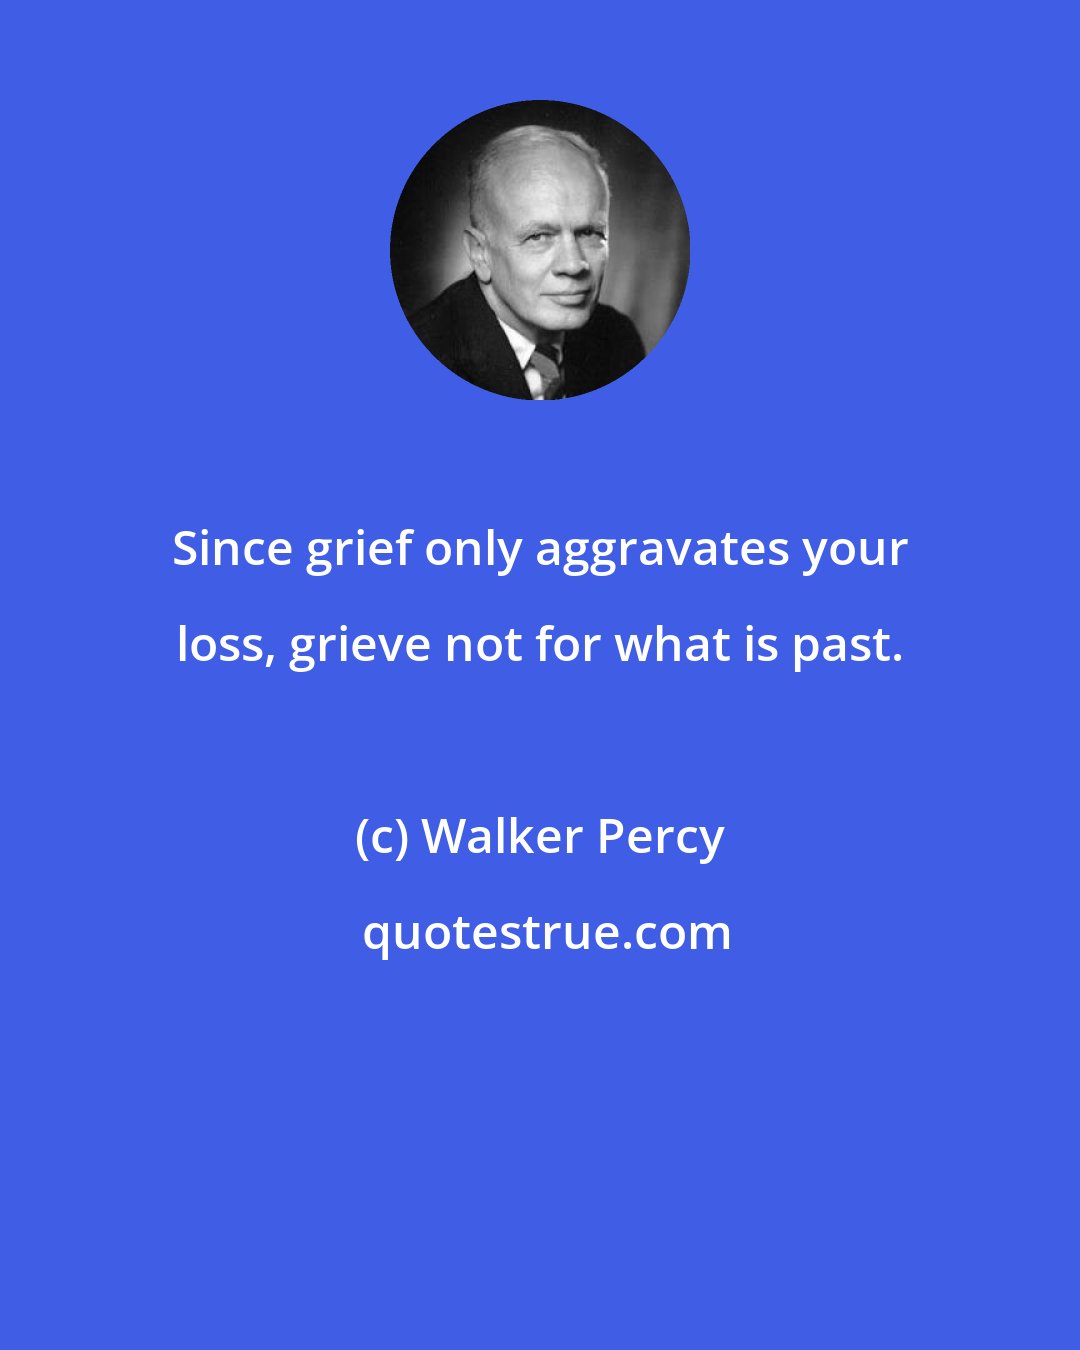 Walker Percy: Since grief only aggravates your loss, grieve not for what is past.